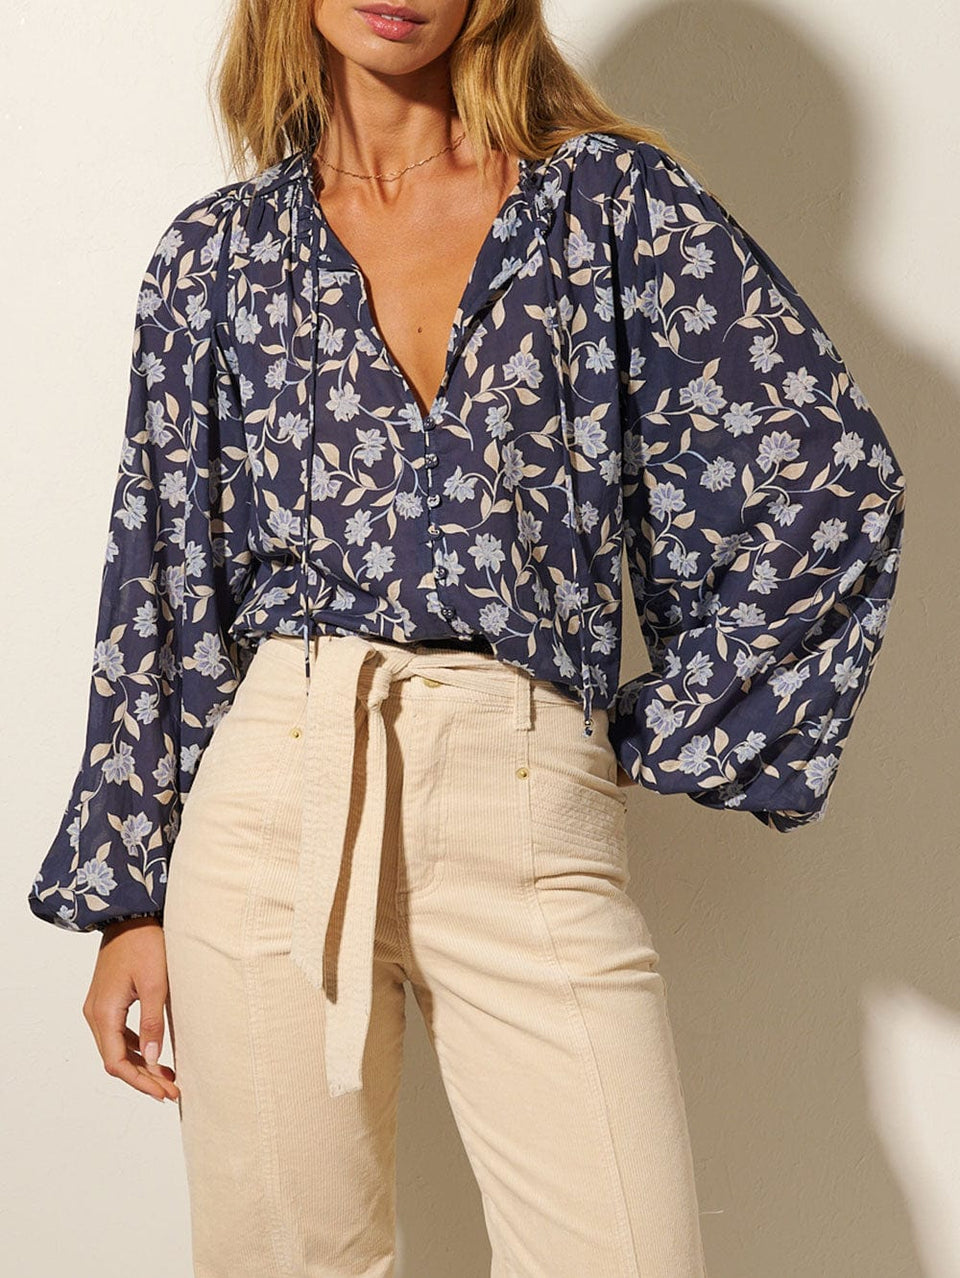 Studio model wears KIVARI Jeanne Blouse: A navy and sky blue floral blouse made from cotton and featuring a button front, full-length blouson sleeves and frill collar detail.